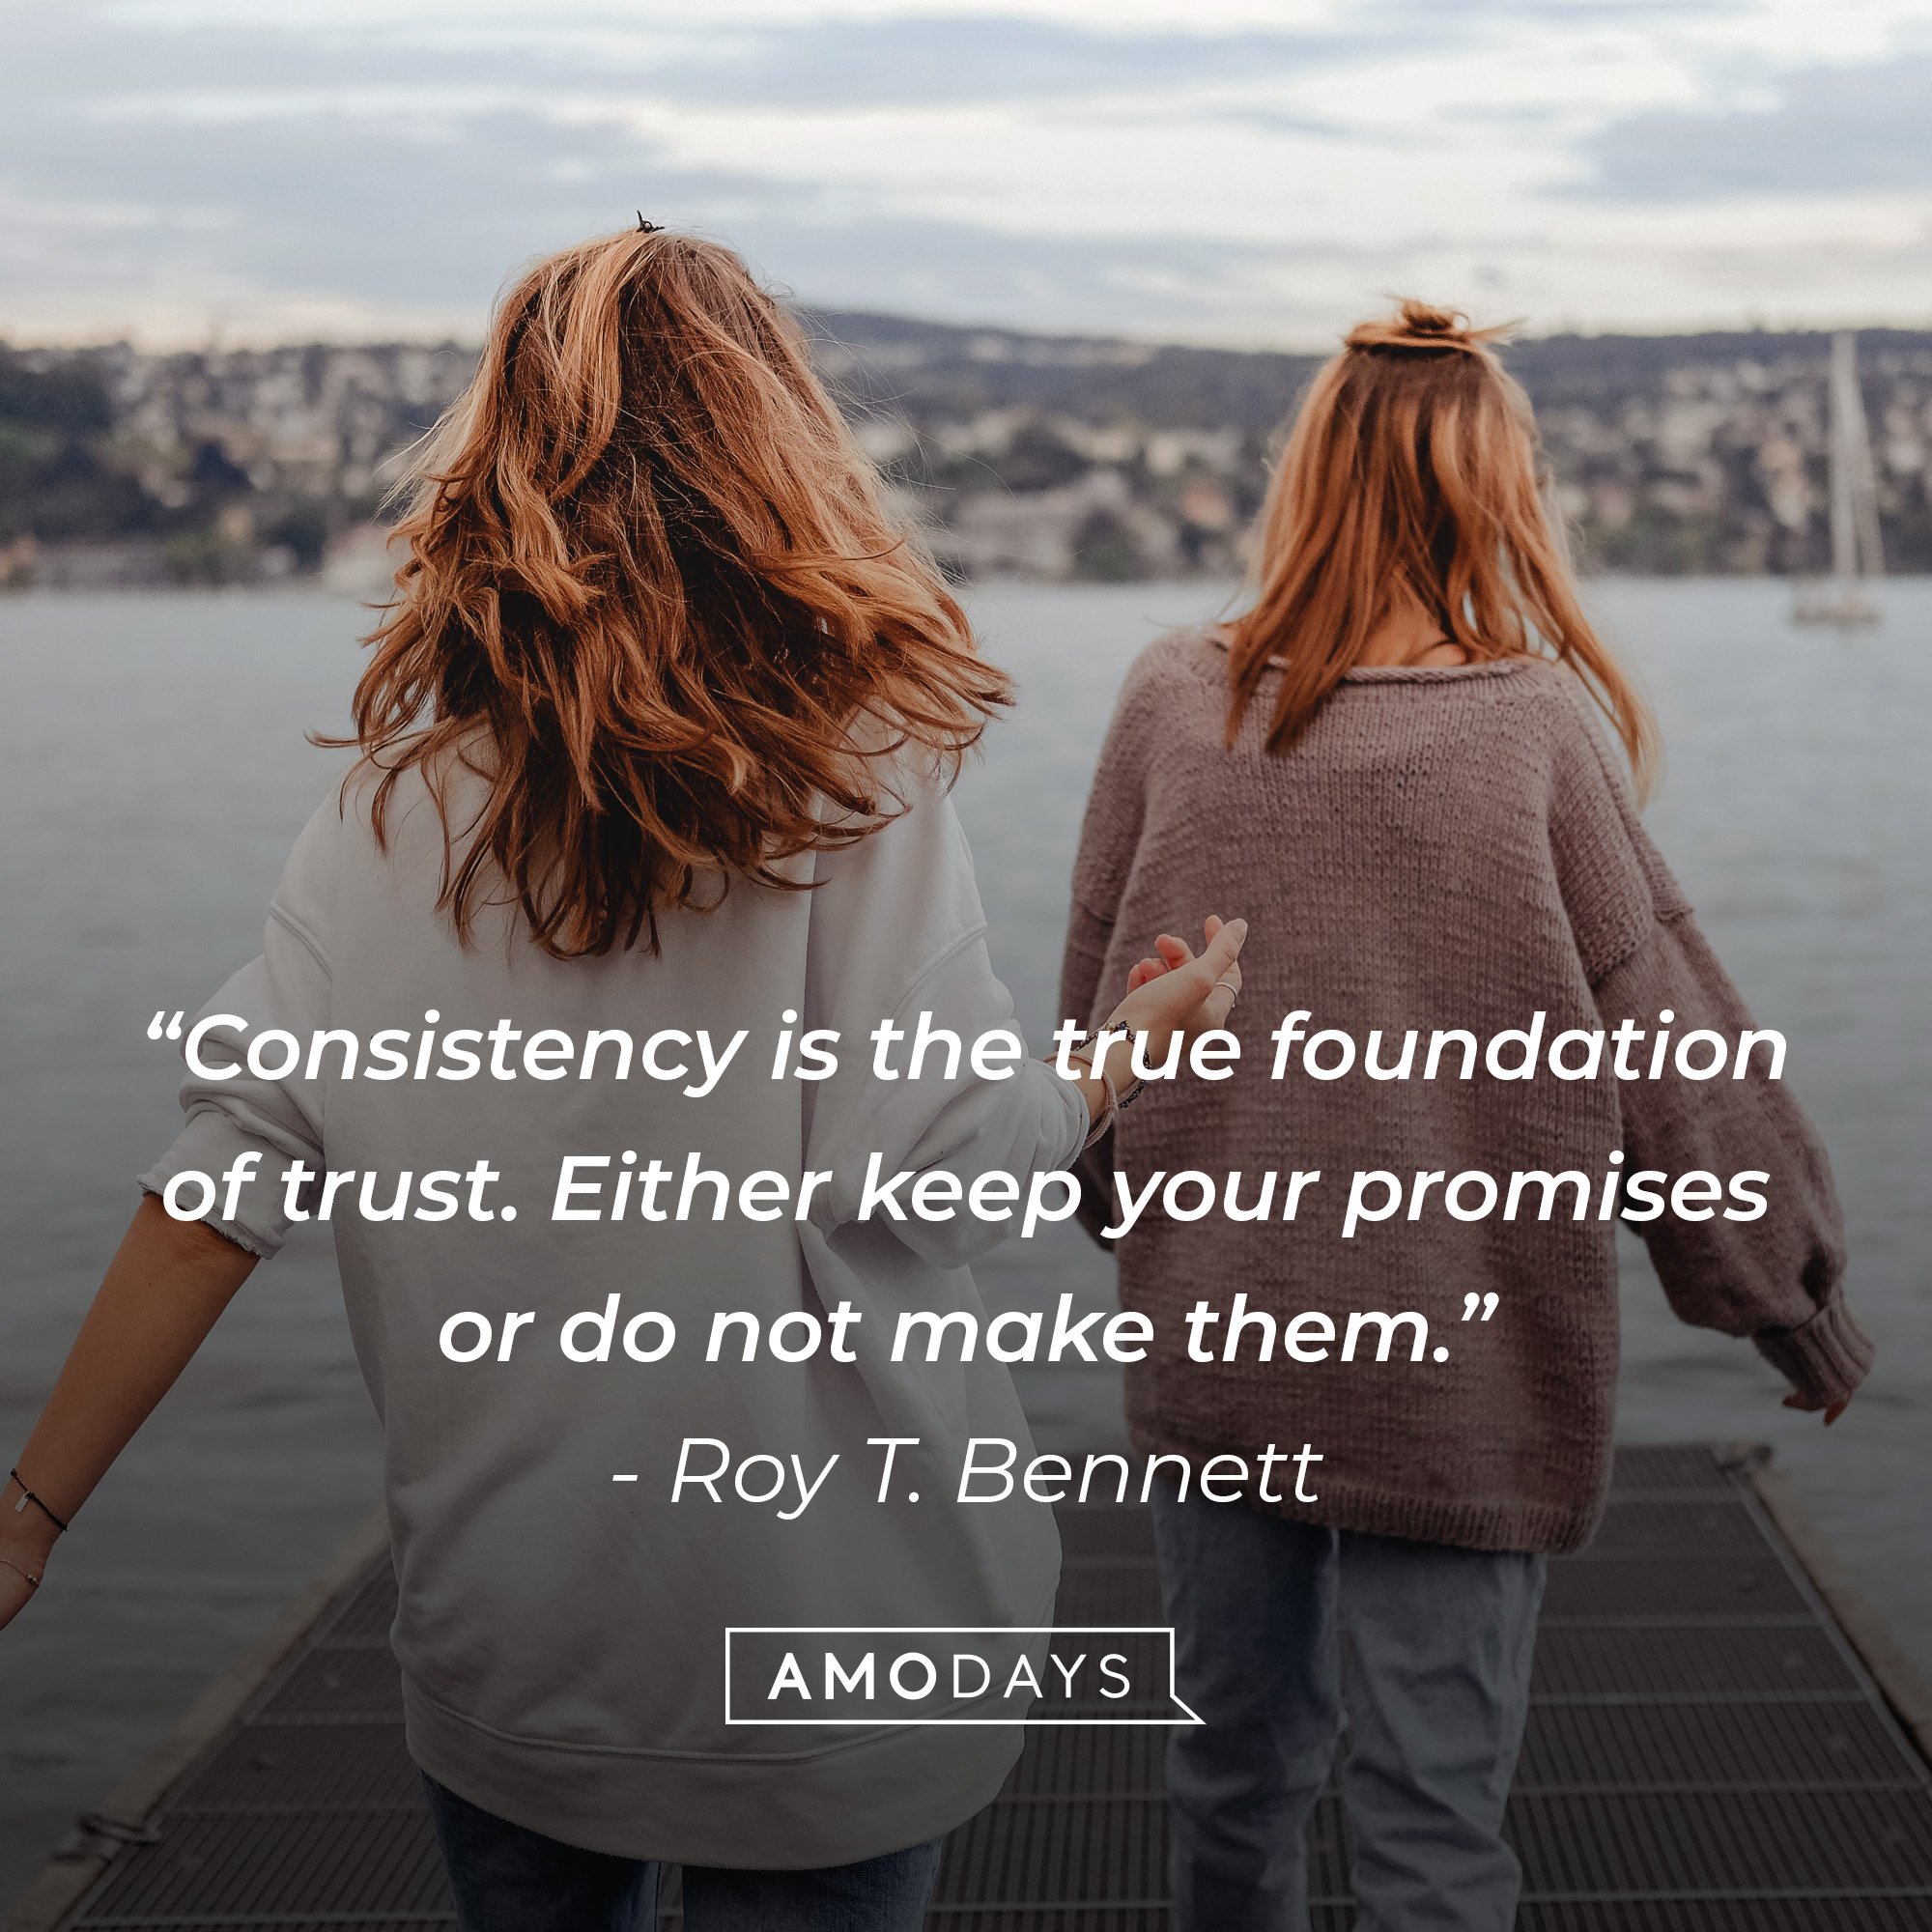 Roy T. Bennett’s quote: “Consistency is the true foundation of trust. Either keep your promises or do not make them.” | Image: AmoDays